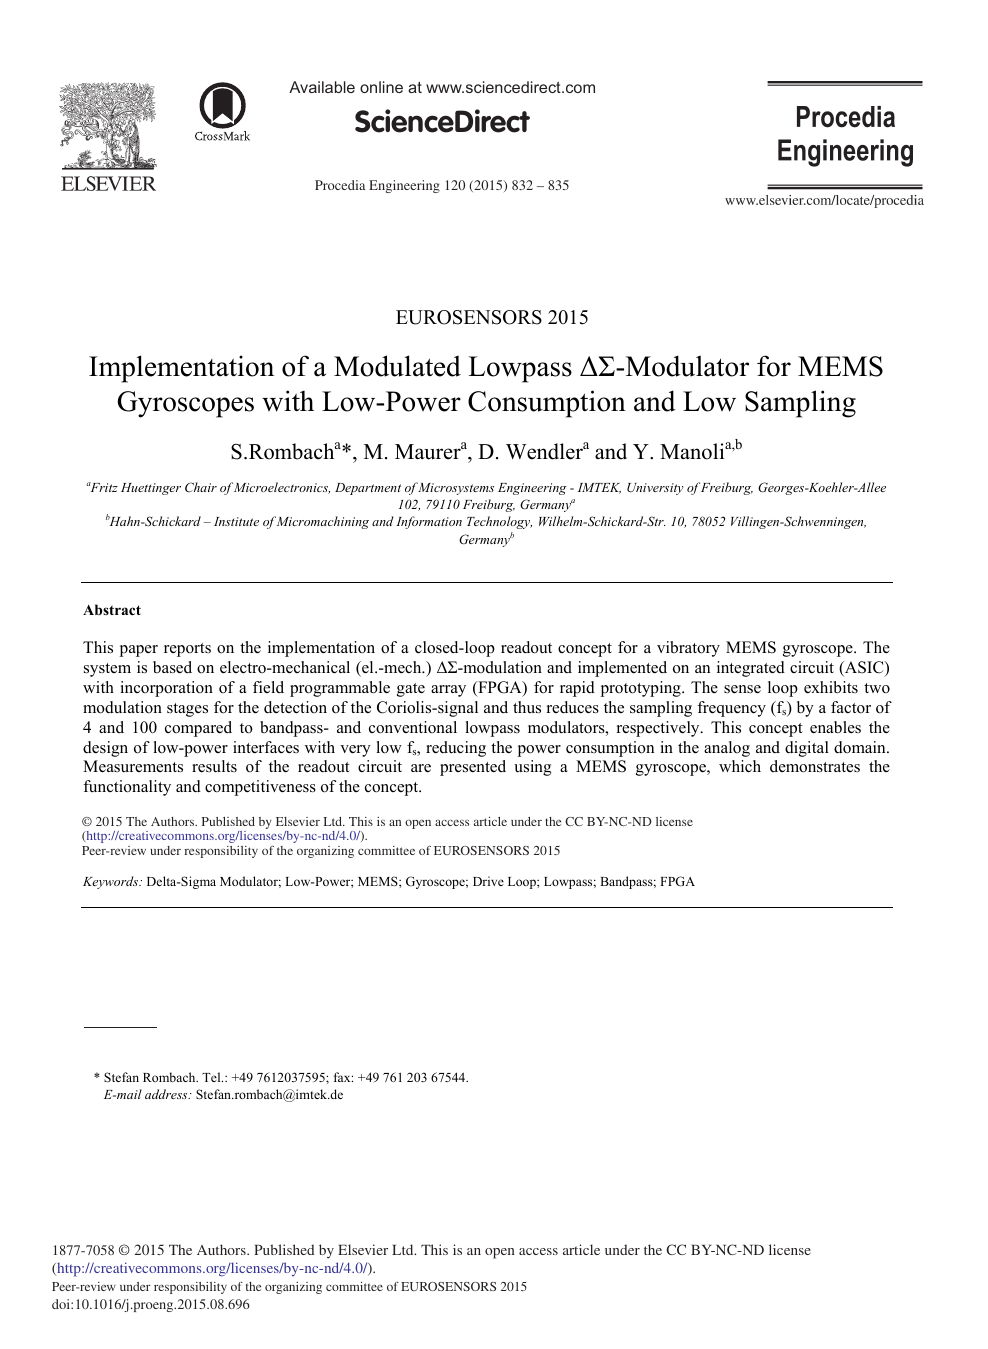 Implementation Of A Modulated Lowpass Ds Modulator For Mems Gyroscopes With Low Power Consumption And Low Sampling Topic Of Research Paper In Materials Engineering Download Scholarly Article Pdf And Read For Free On